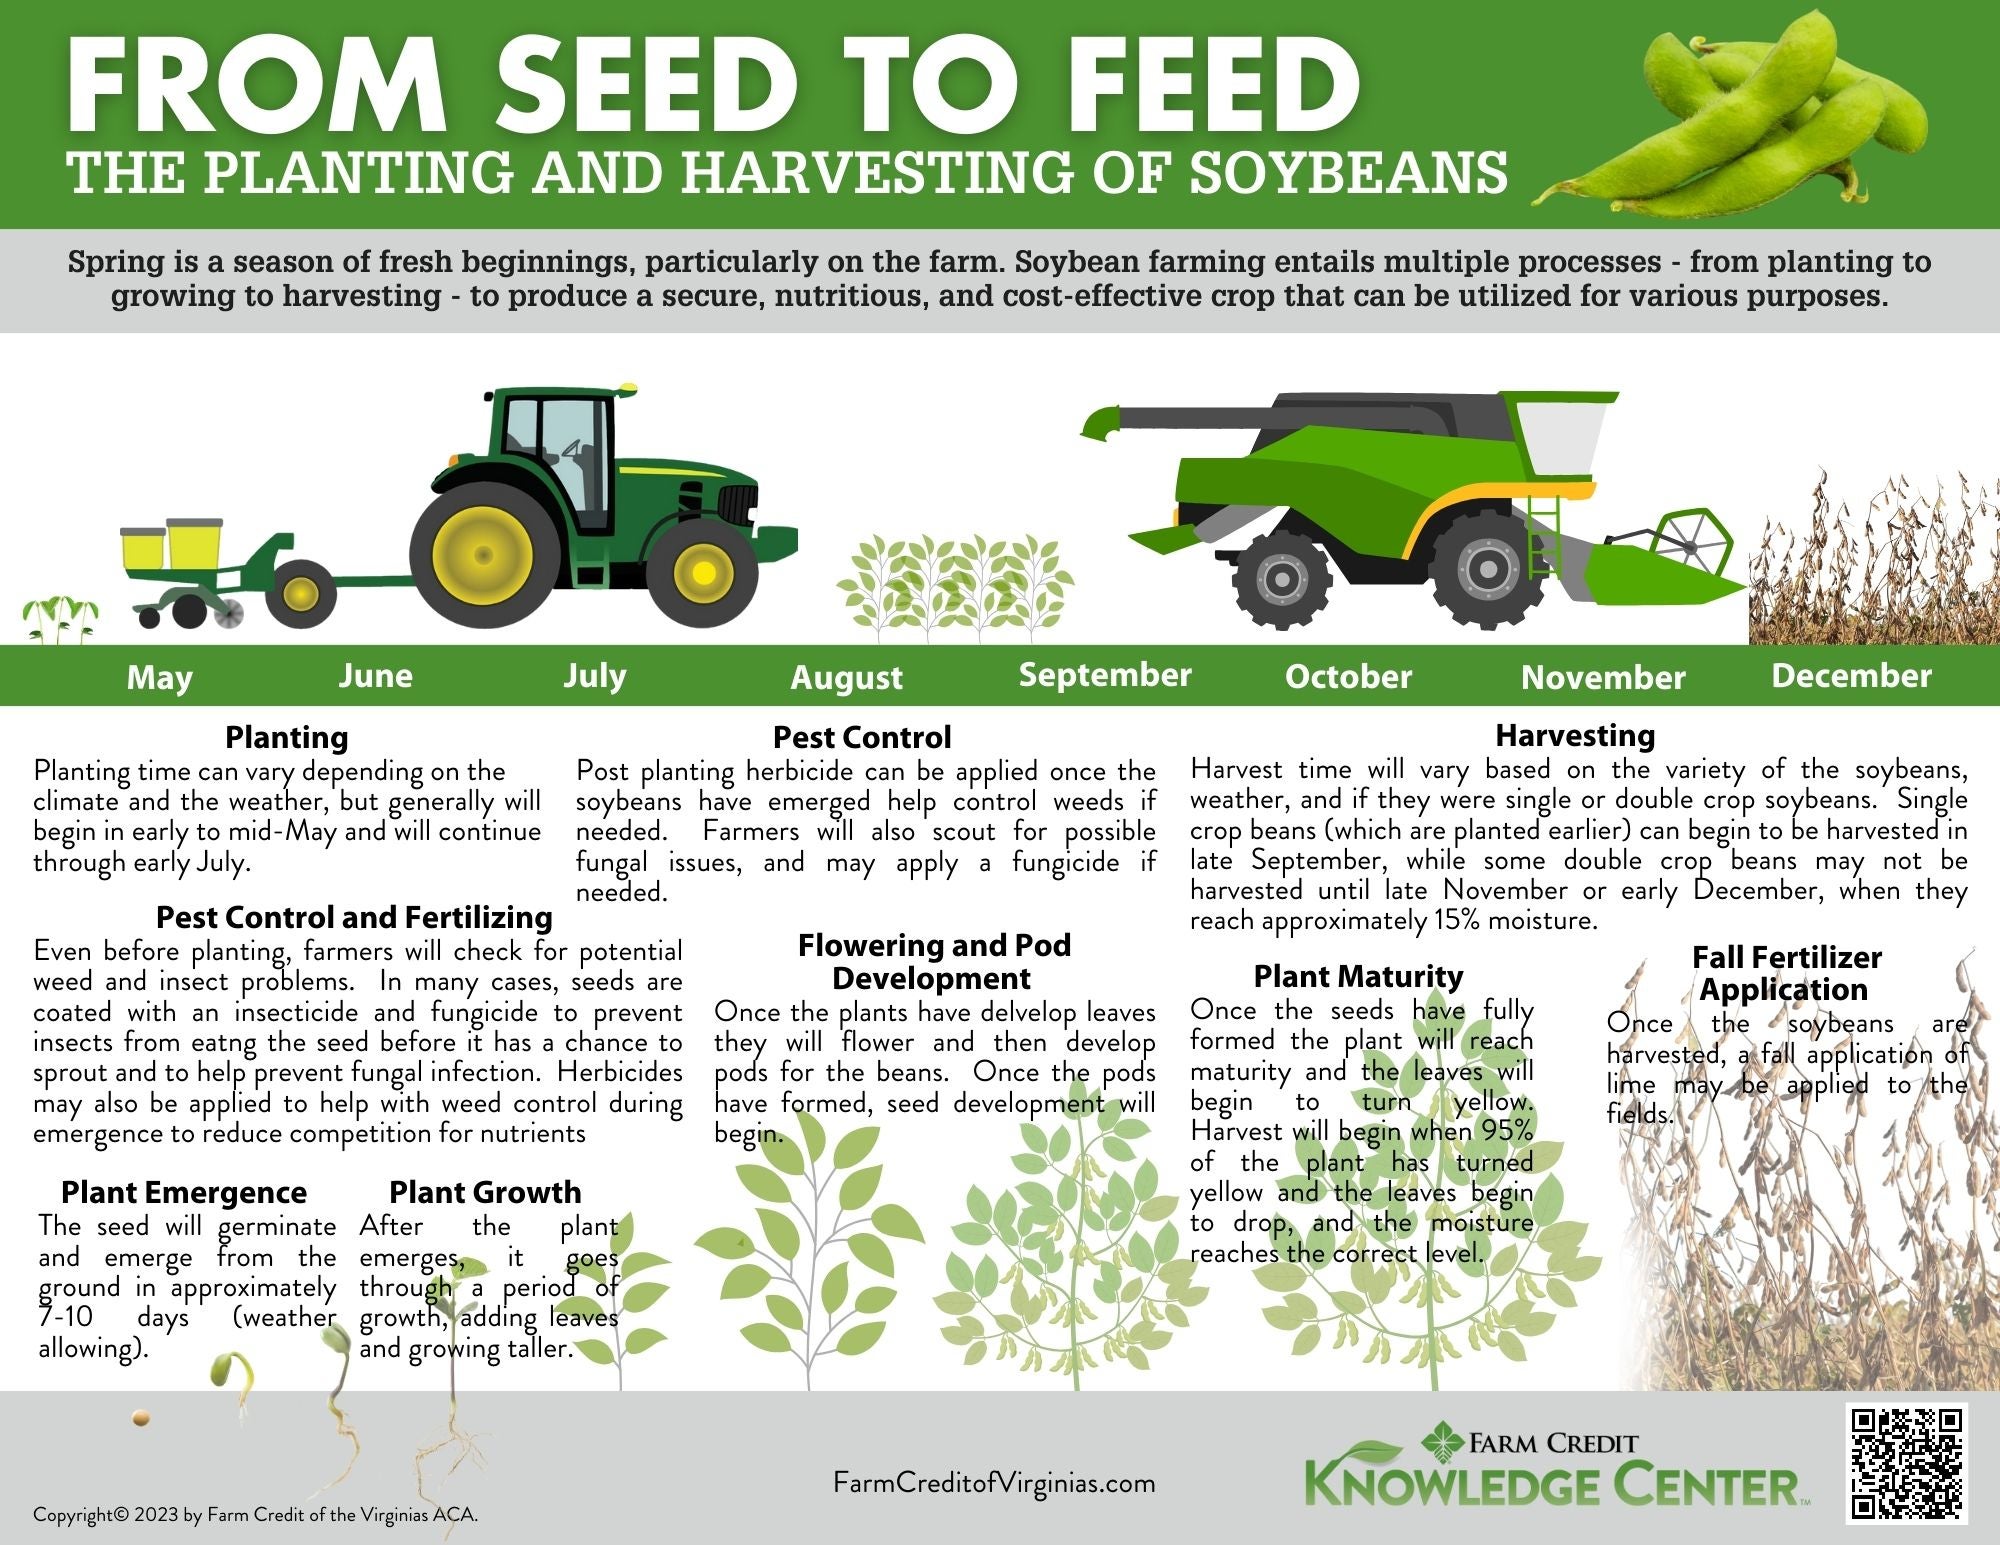 From seed to feed harvesting of soybean infographic